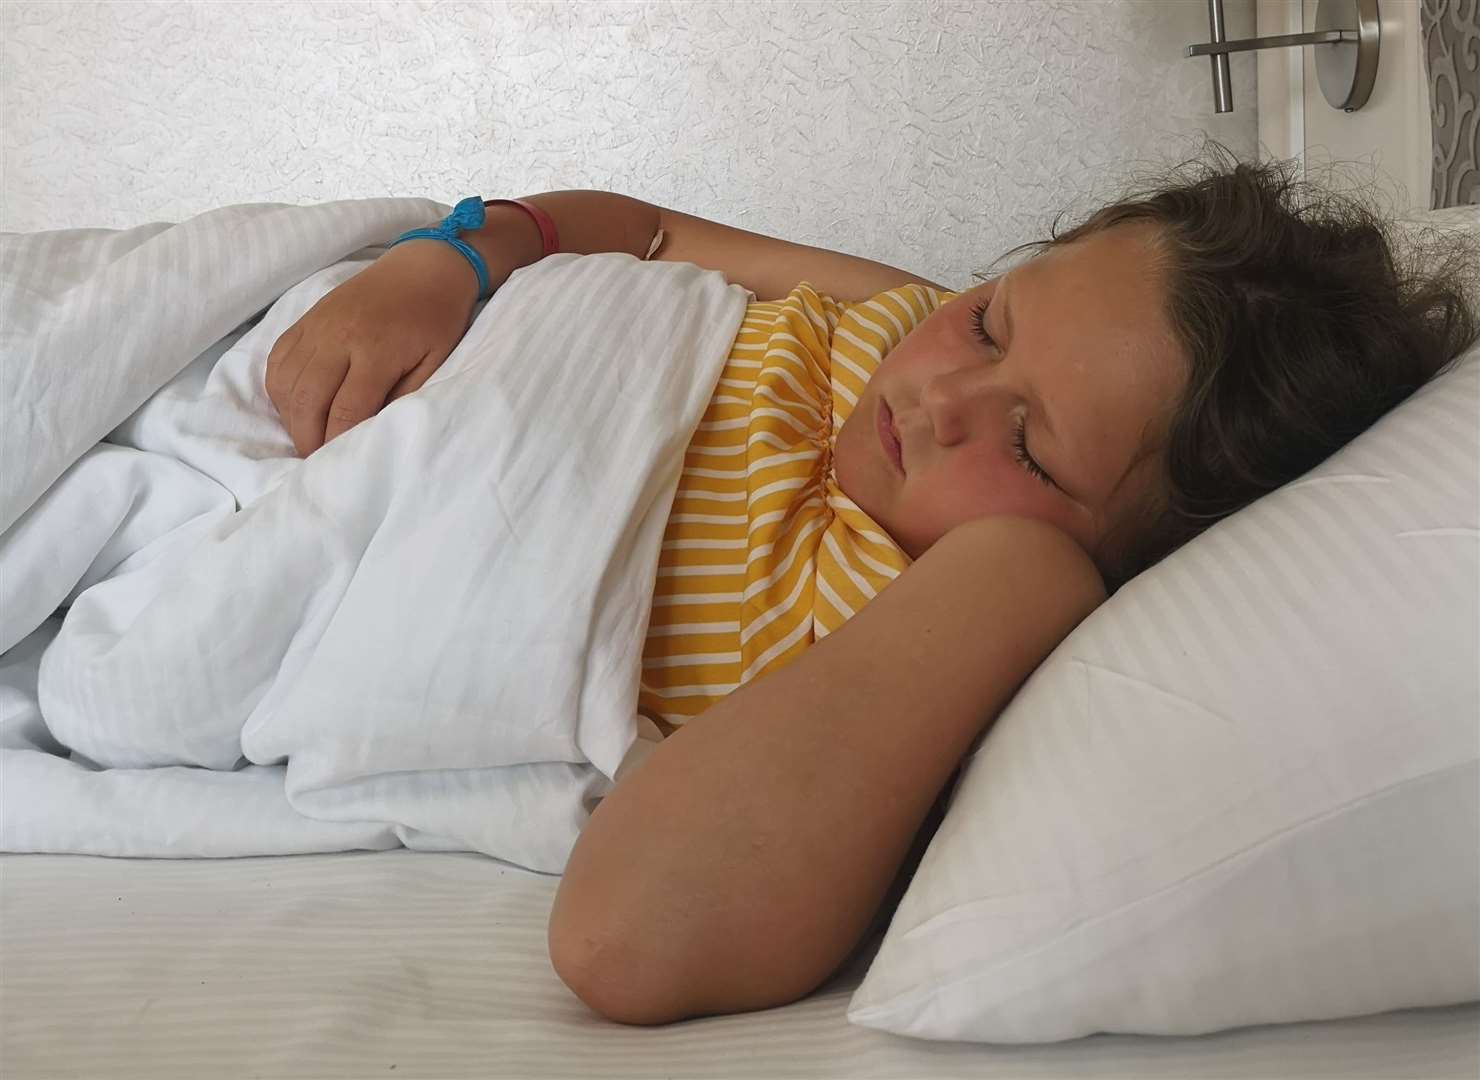 Tilly spent the last day of her Turkish beach holiday sleeping in a hotel room